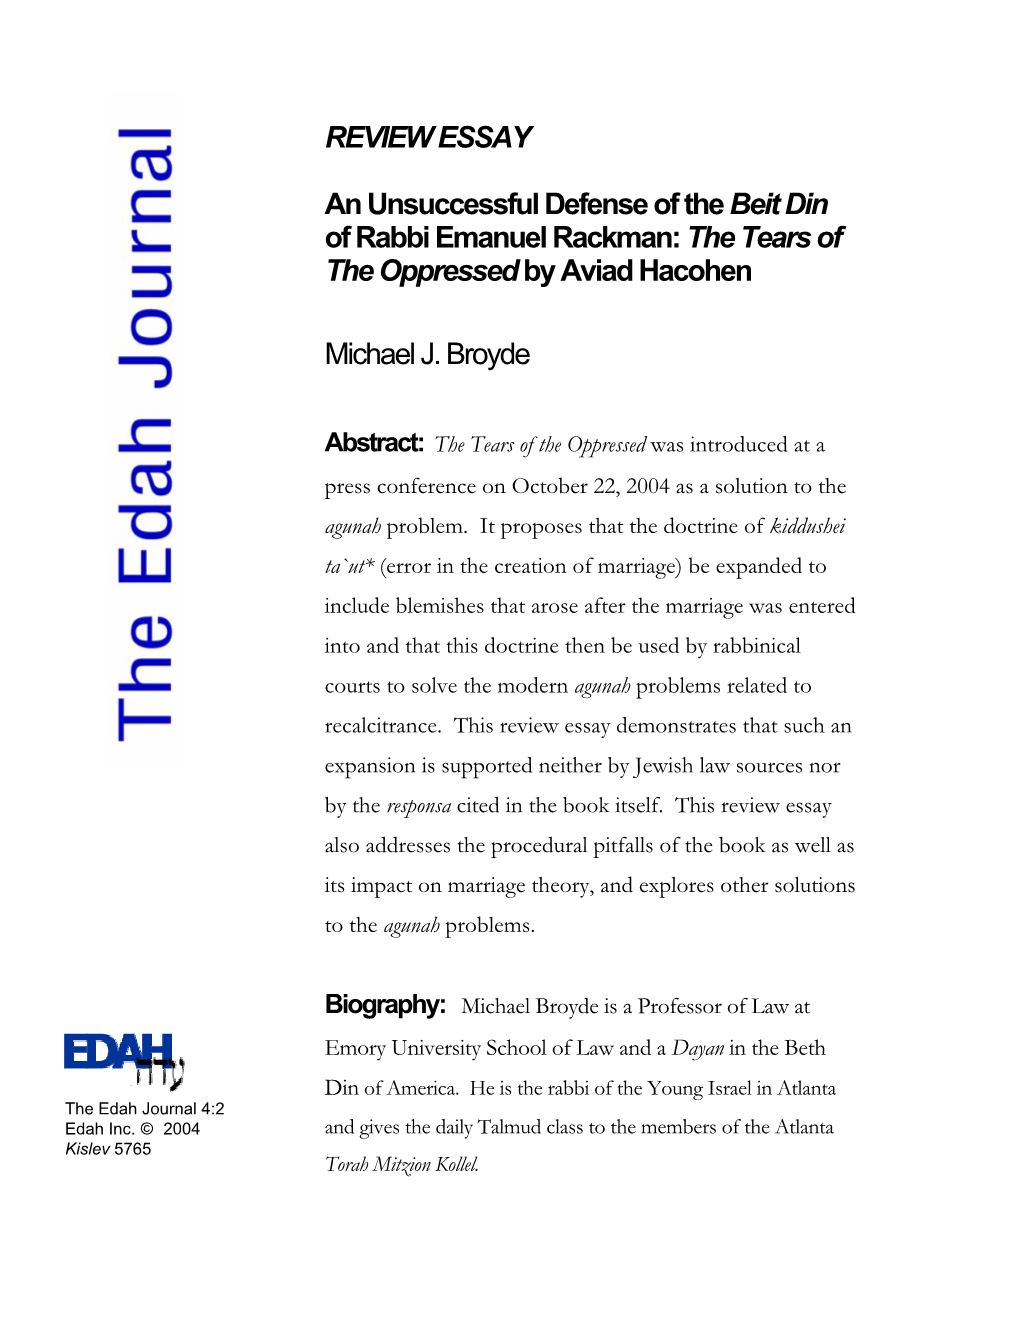 REVIEW ESSAY an Unsuccessful Defense of the Beit